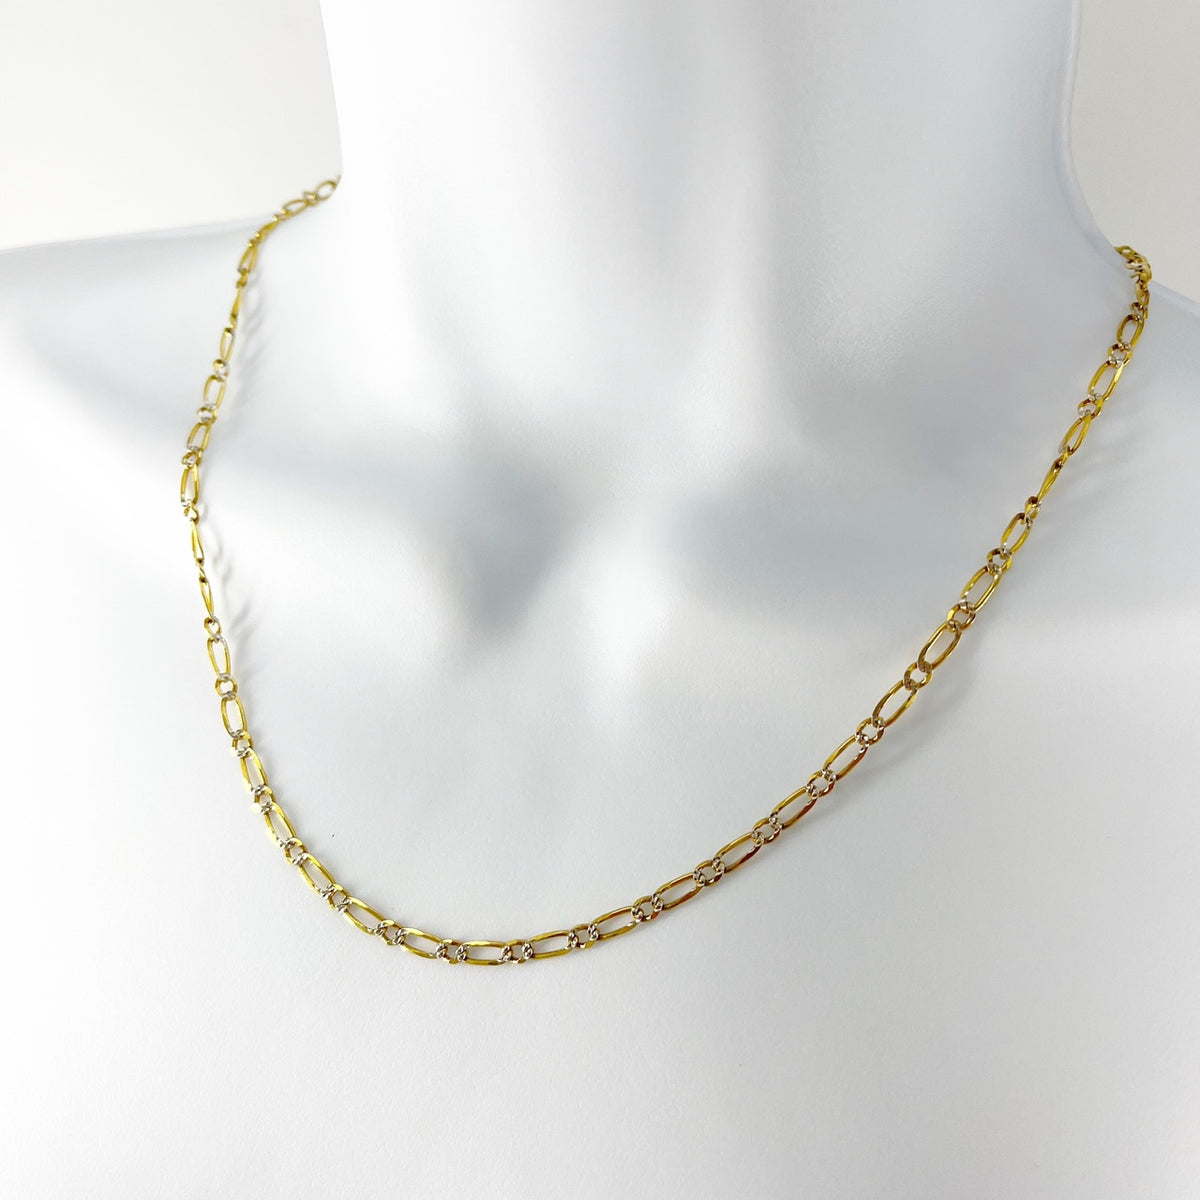 14k Solid yellow Gold/White Gold Paperclip Chain Necklace 20"[14K Solid Gold]